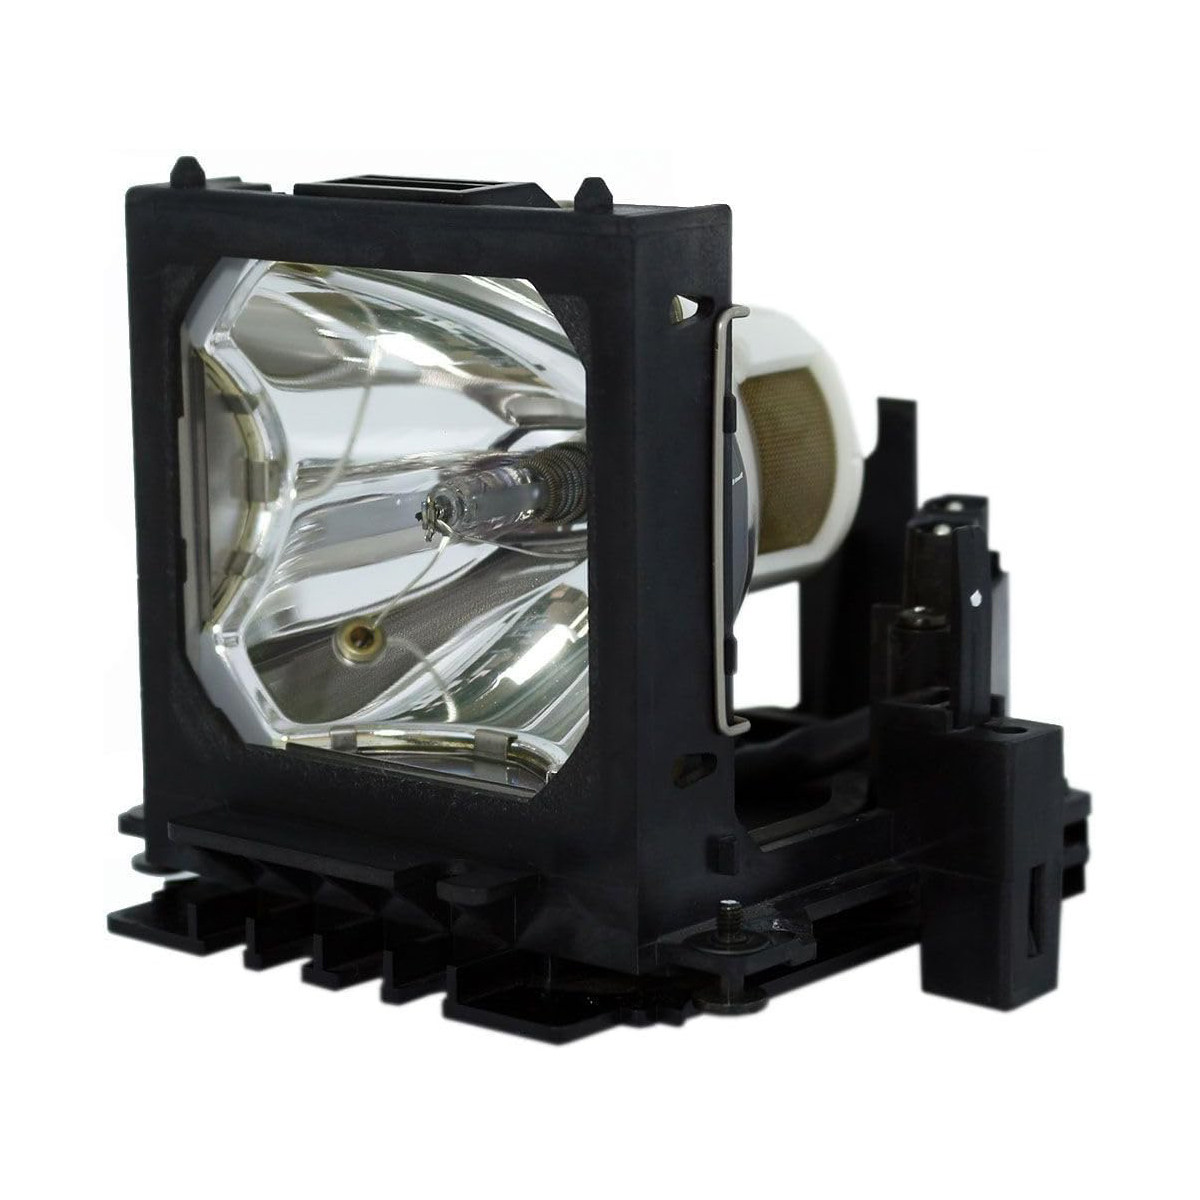 Replacement Projector lamp 78-6969-9601-2 For 3M MP8790